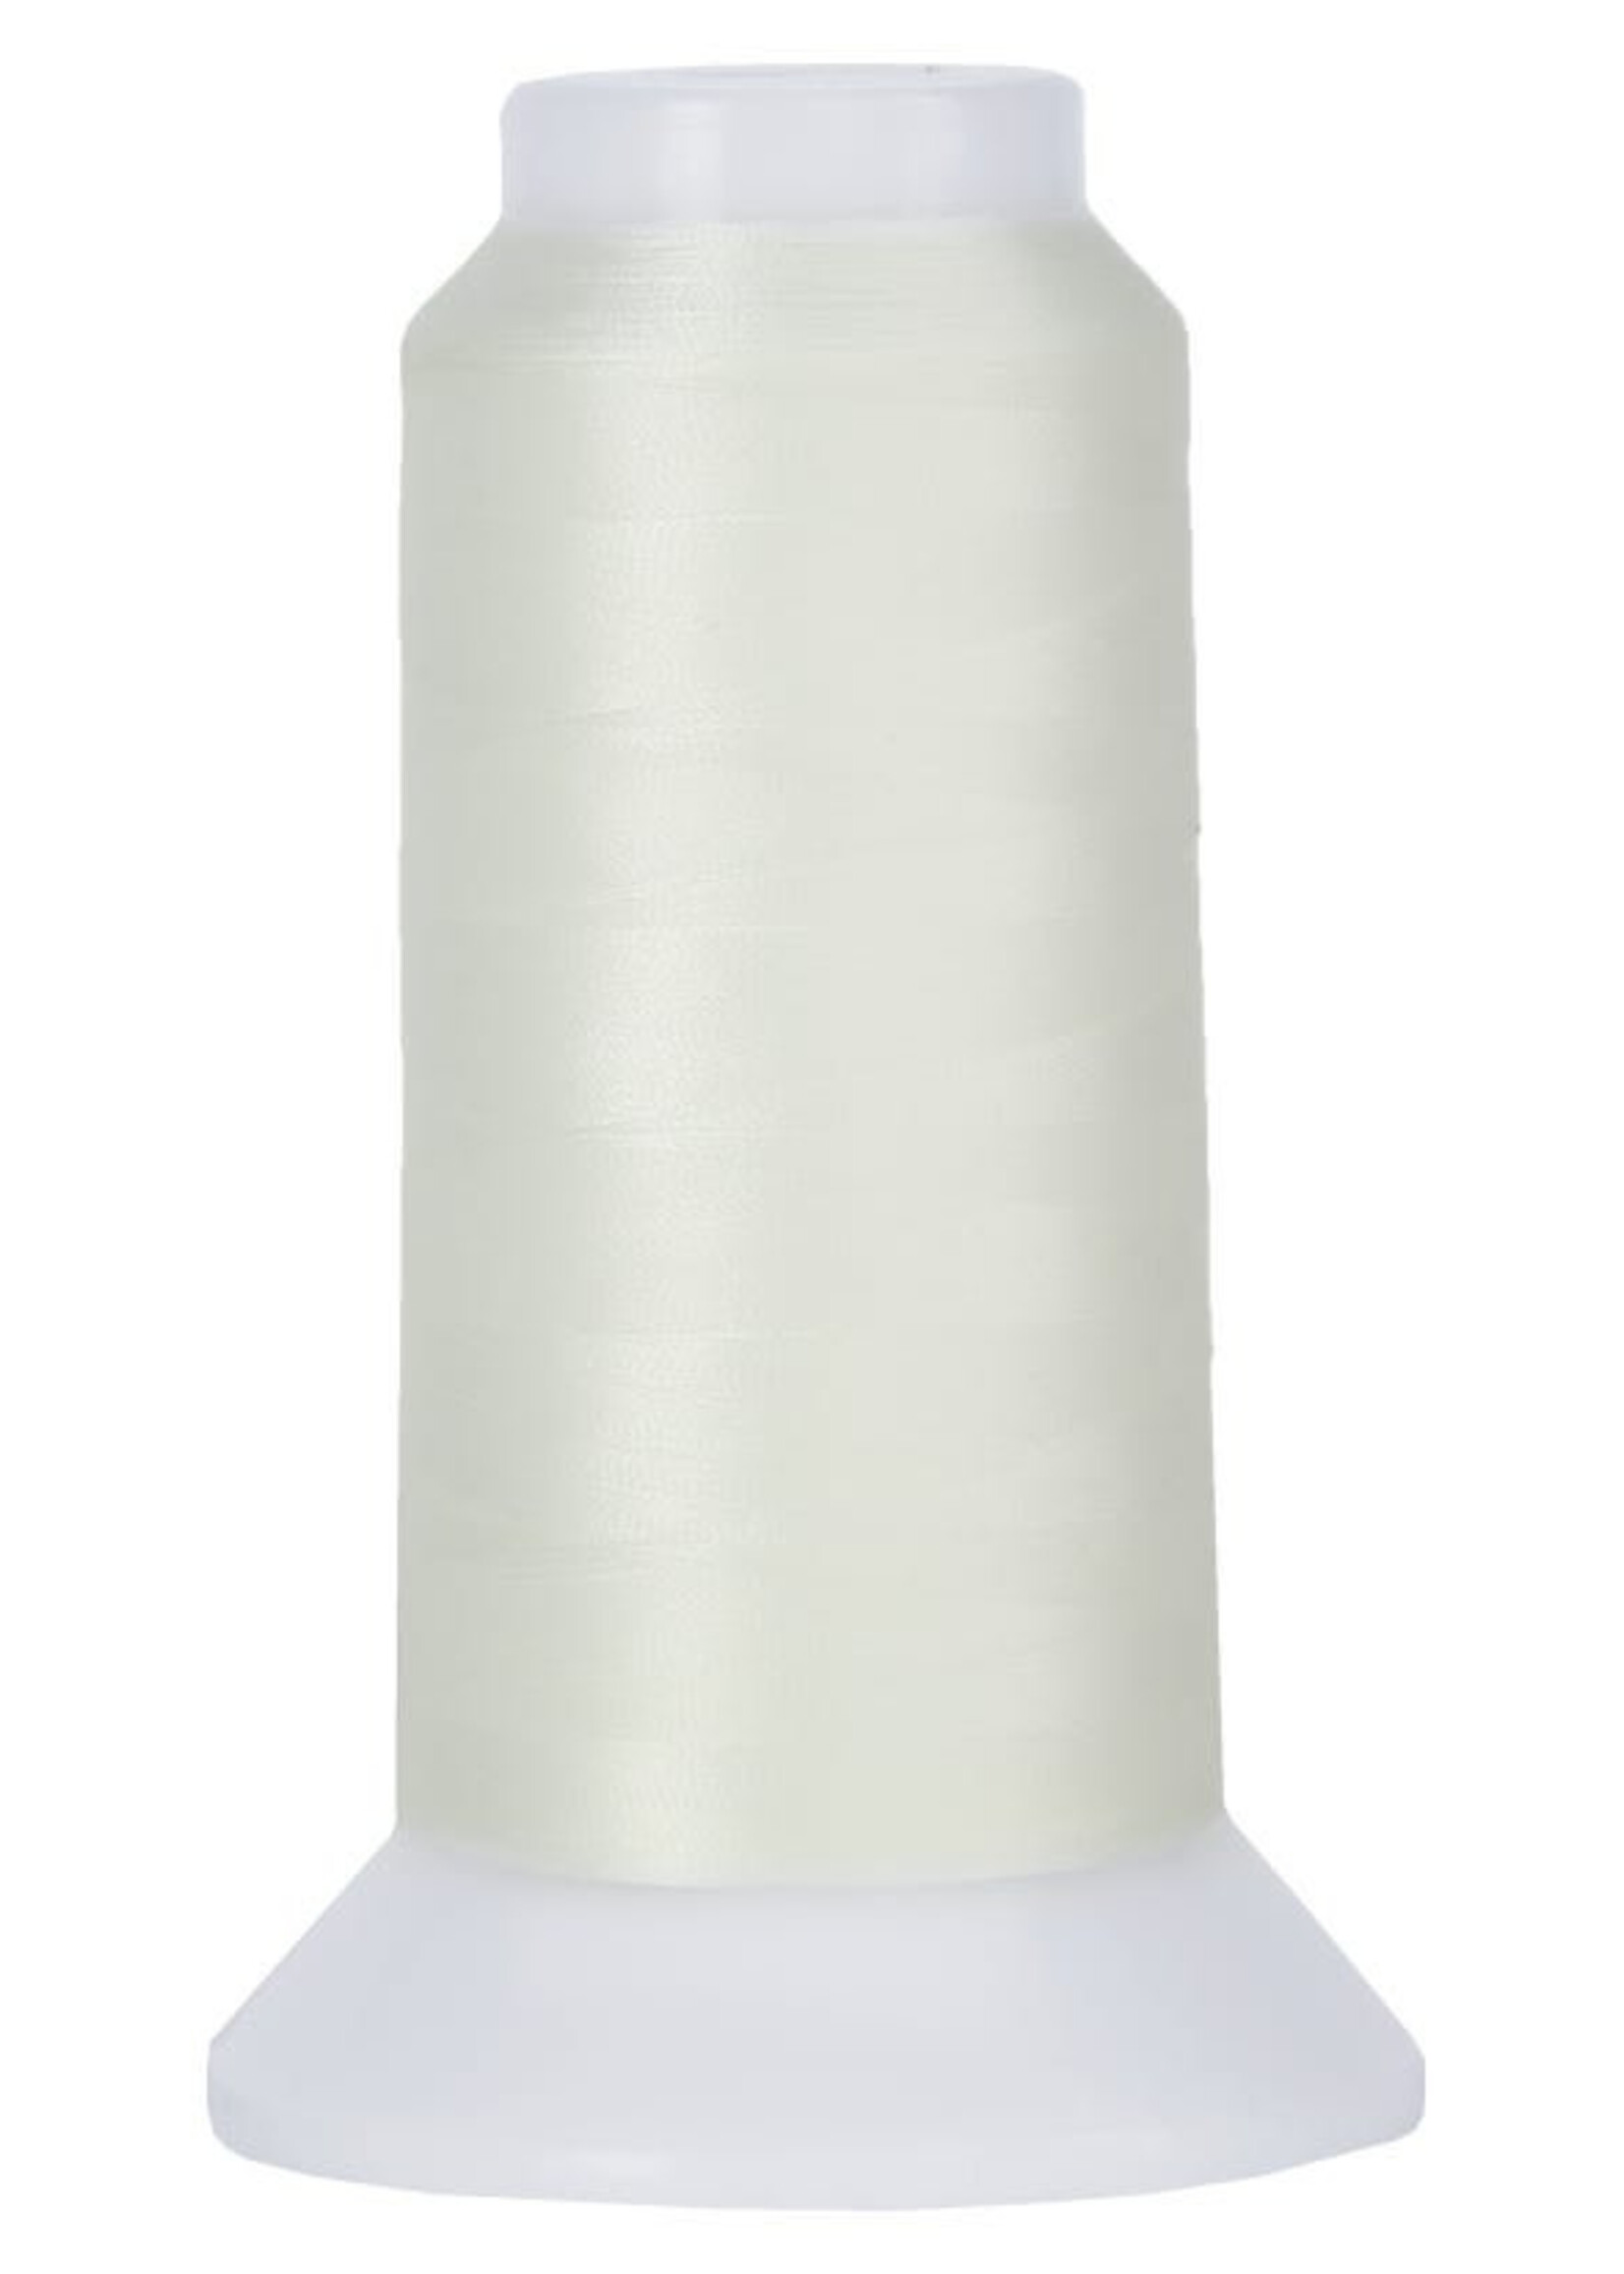 Superior Threads MicroQuilter 3,000 yd cone 100Wt. 7001 Natural White